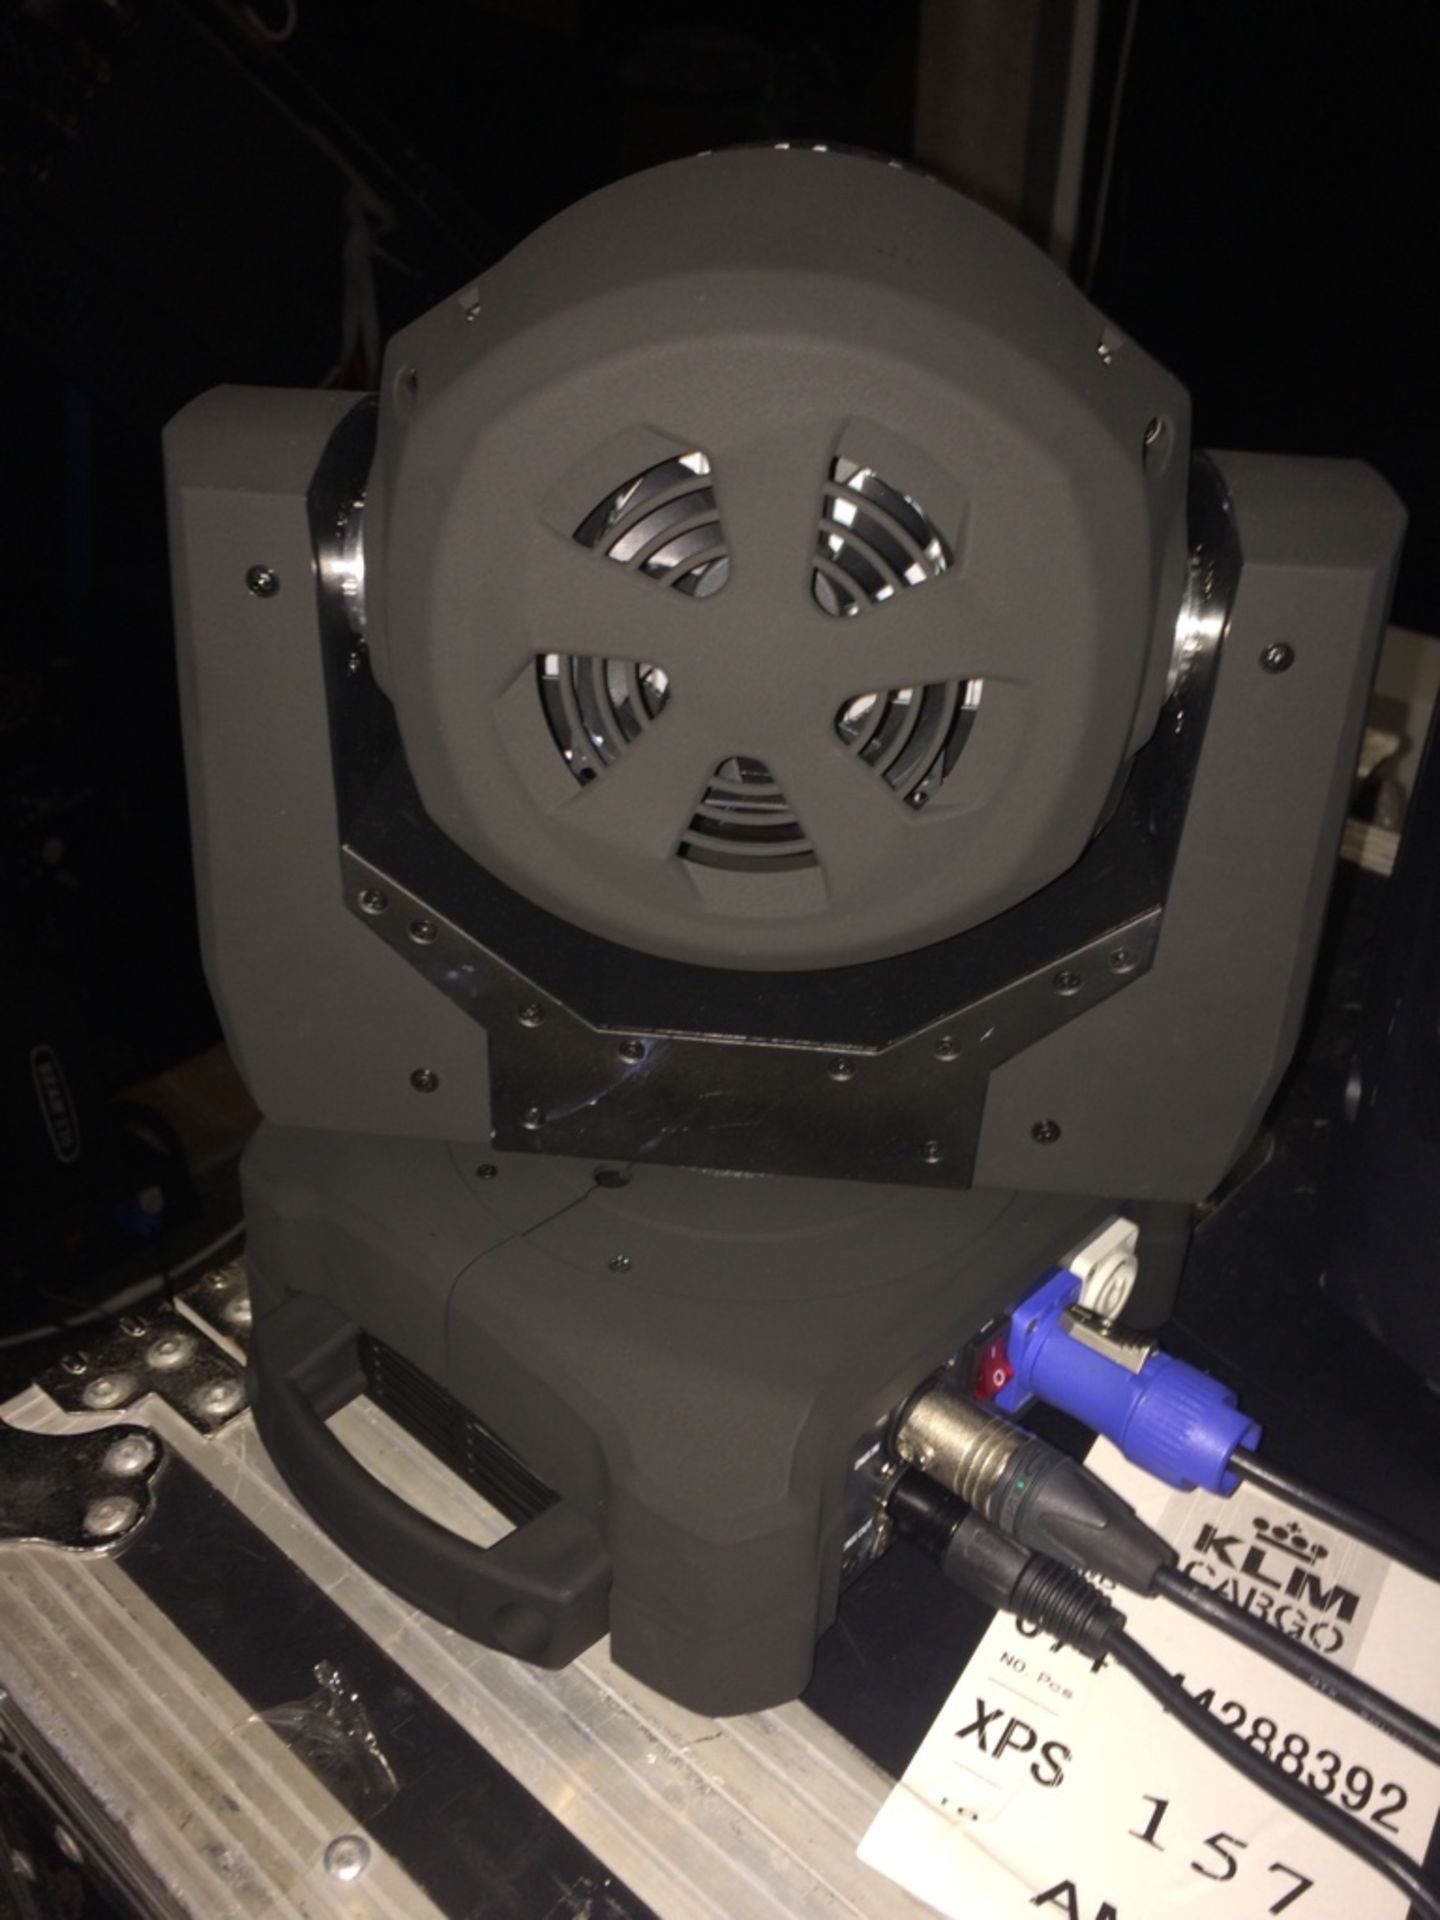 Led Moving Head Light - New Only Taken Out Of Box To Test - Image 4 of 4